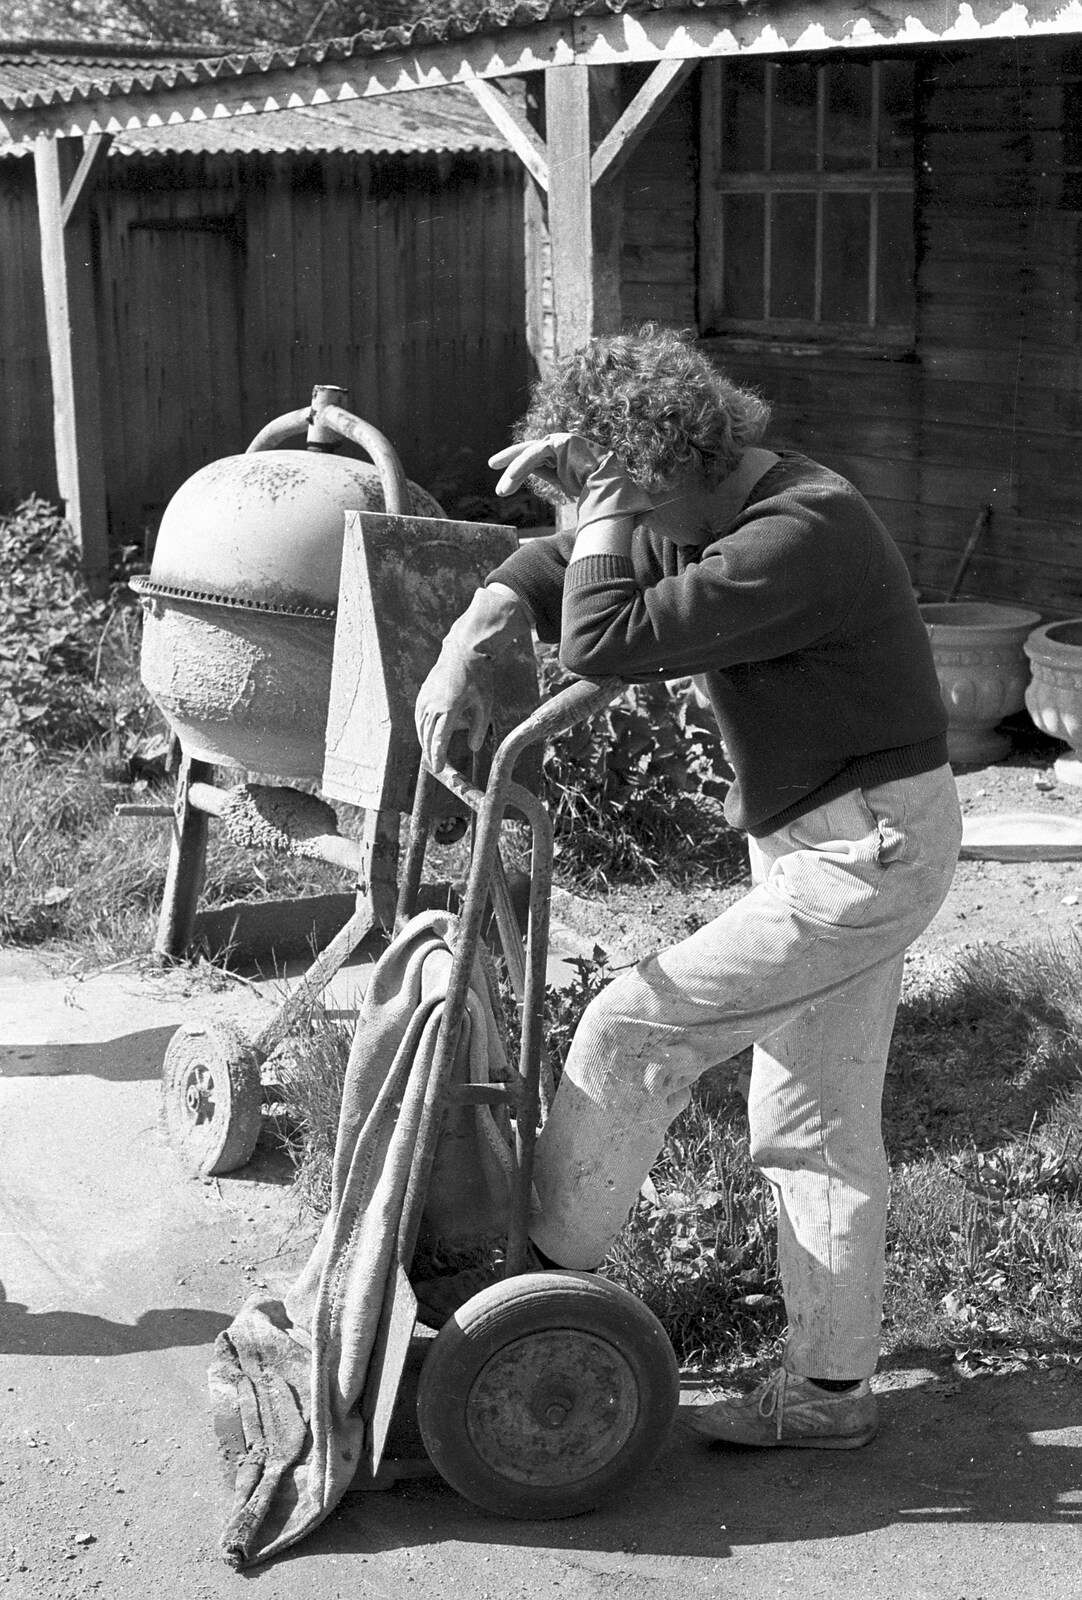 A Black and White Life in Concrete, Stuston, Suffolk - 3rd September 1992: Brenda pauses; leaning on a sack barrow